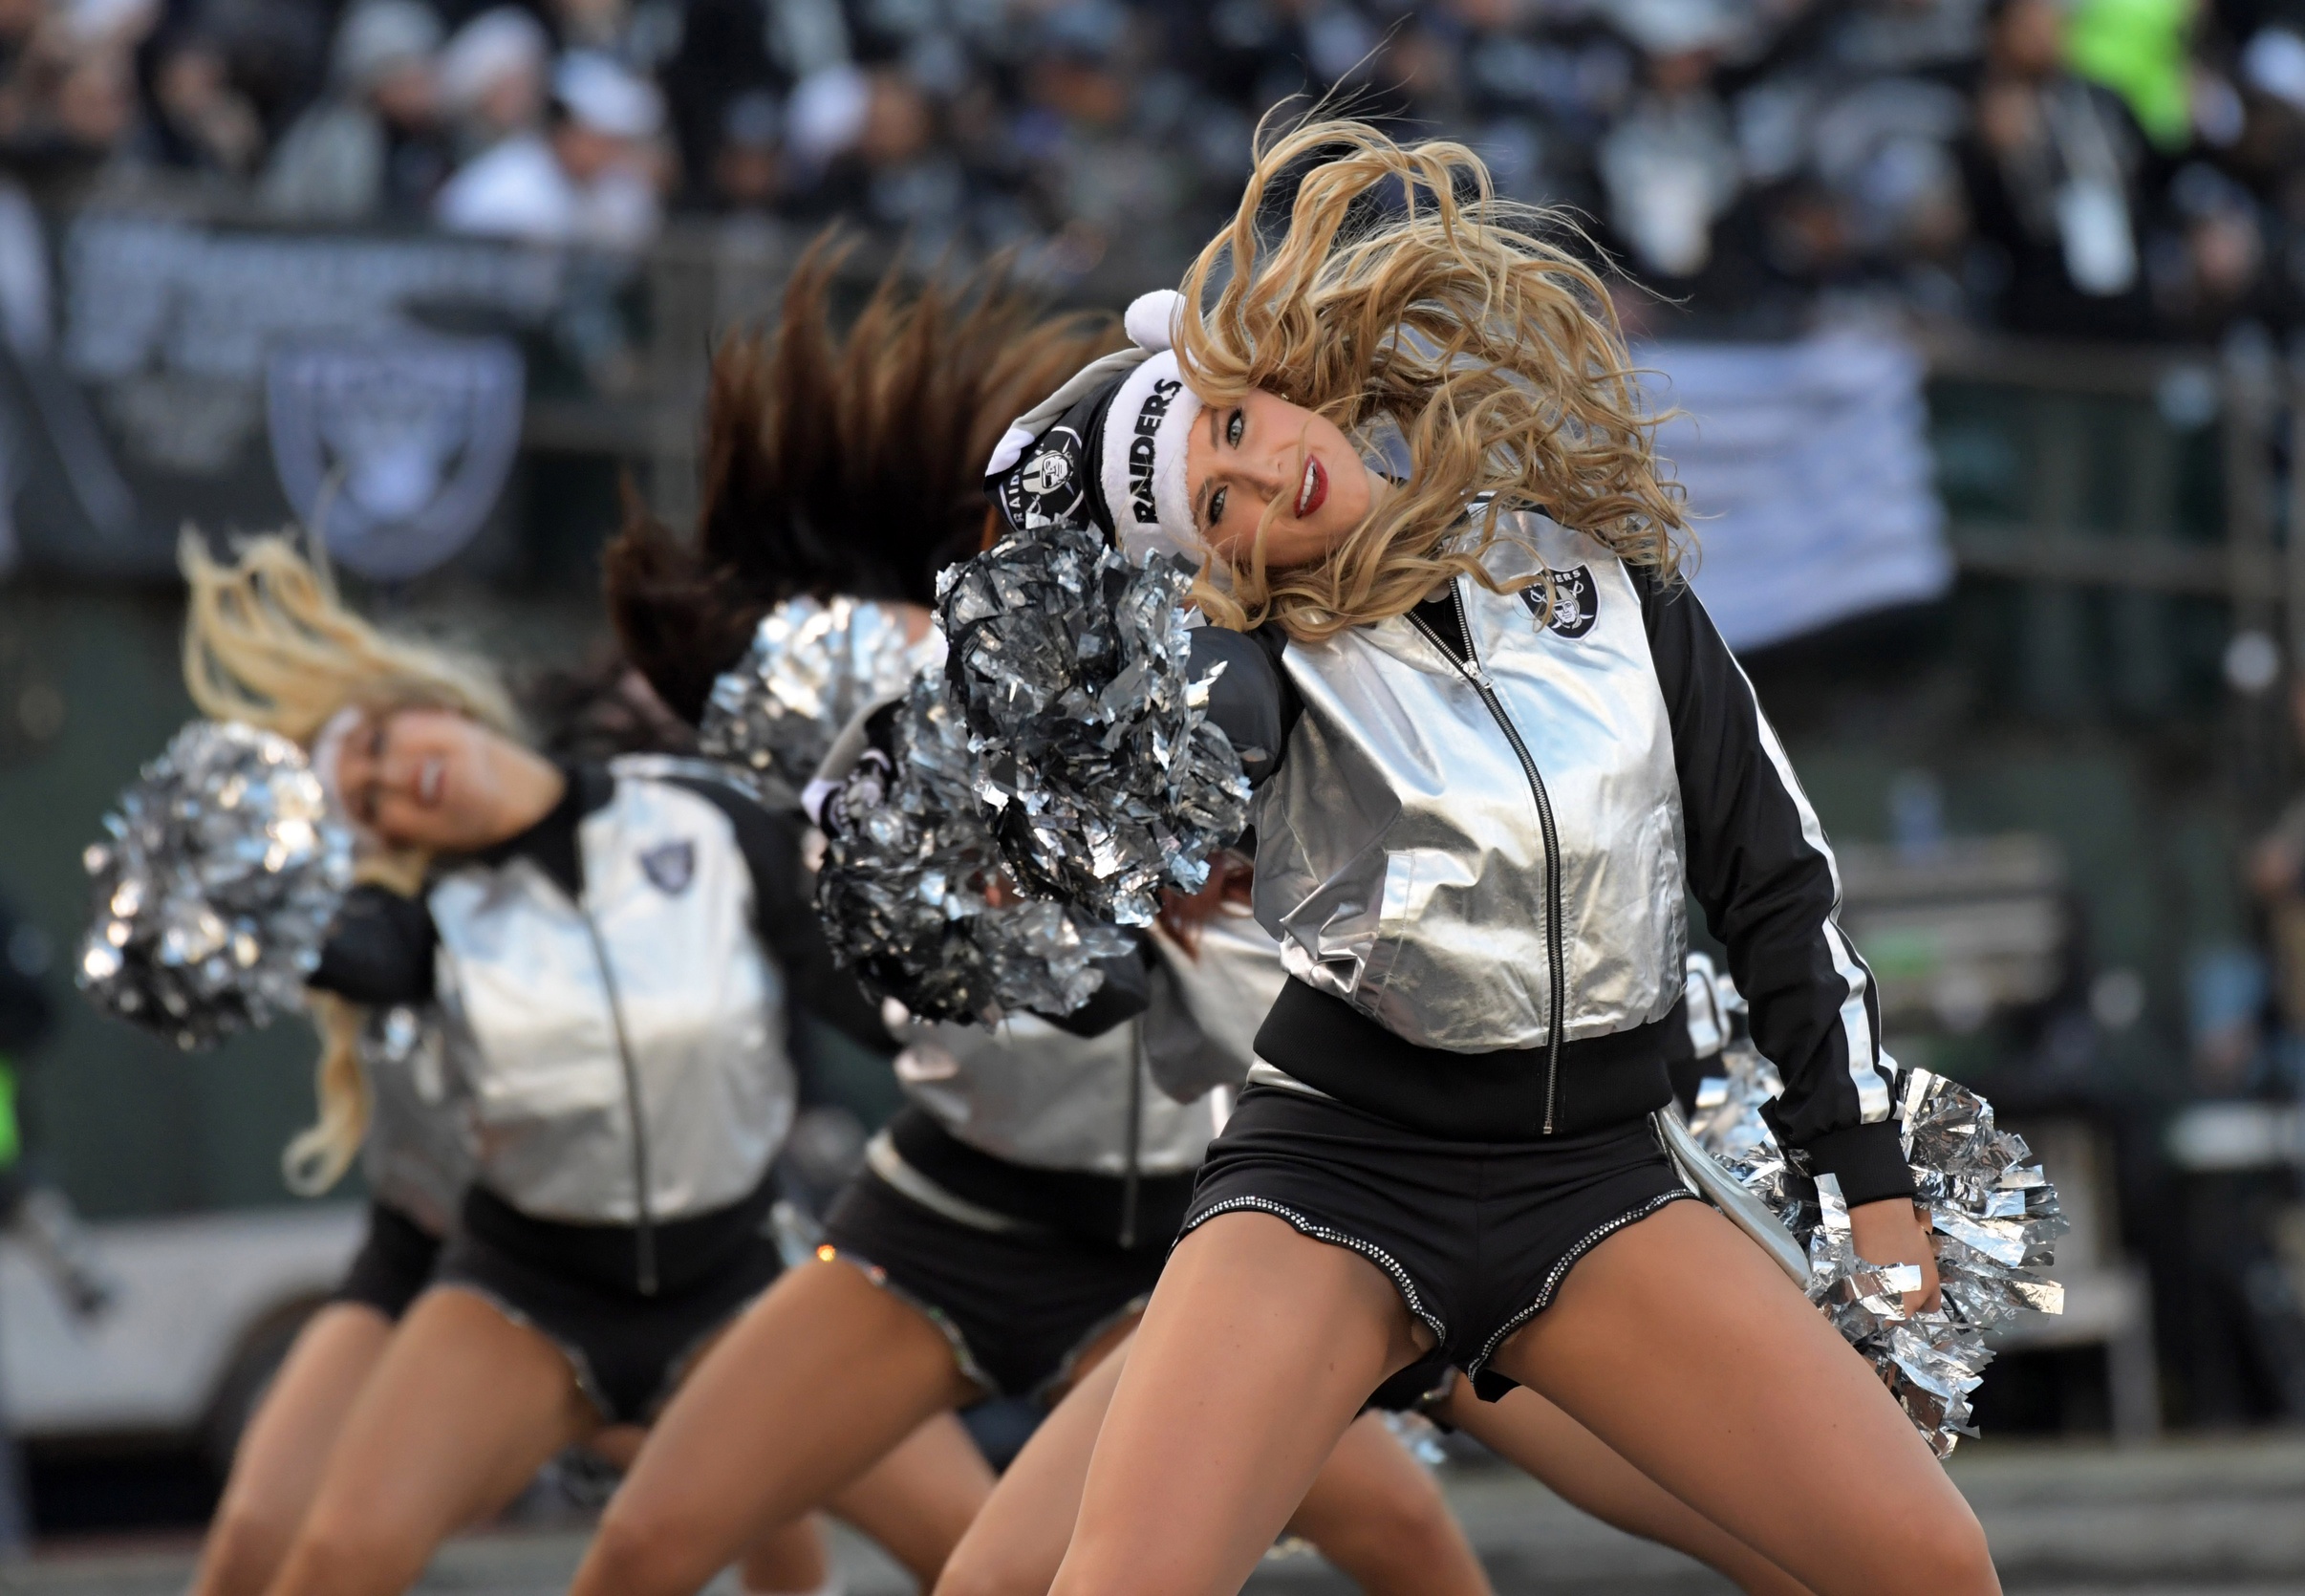 Caption: Dec 24, 2016; Oakland, CA, USA; Oakland Raiders raiderette cheerleaders pose during a NFL football game against the Indianapolis Colts at Oakland-Alameda Coliseum. Mandatory Credit: Kirby Lee-USA TODAY Sports Created: